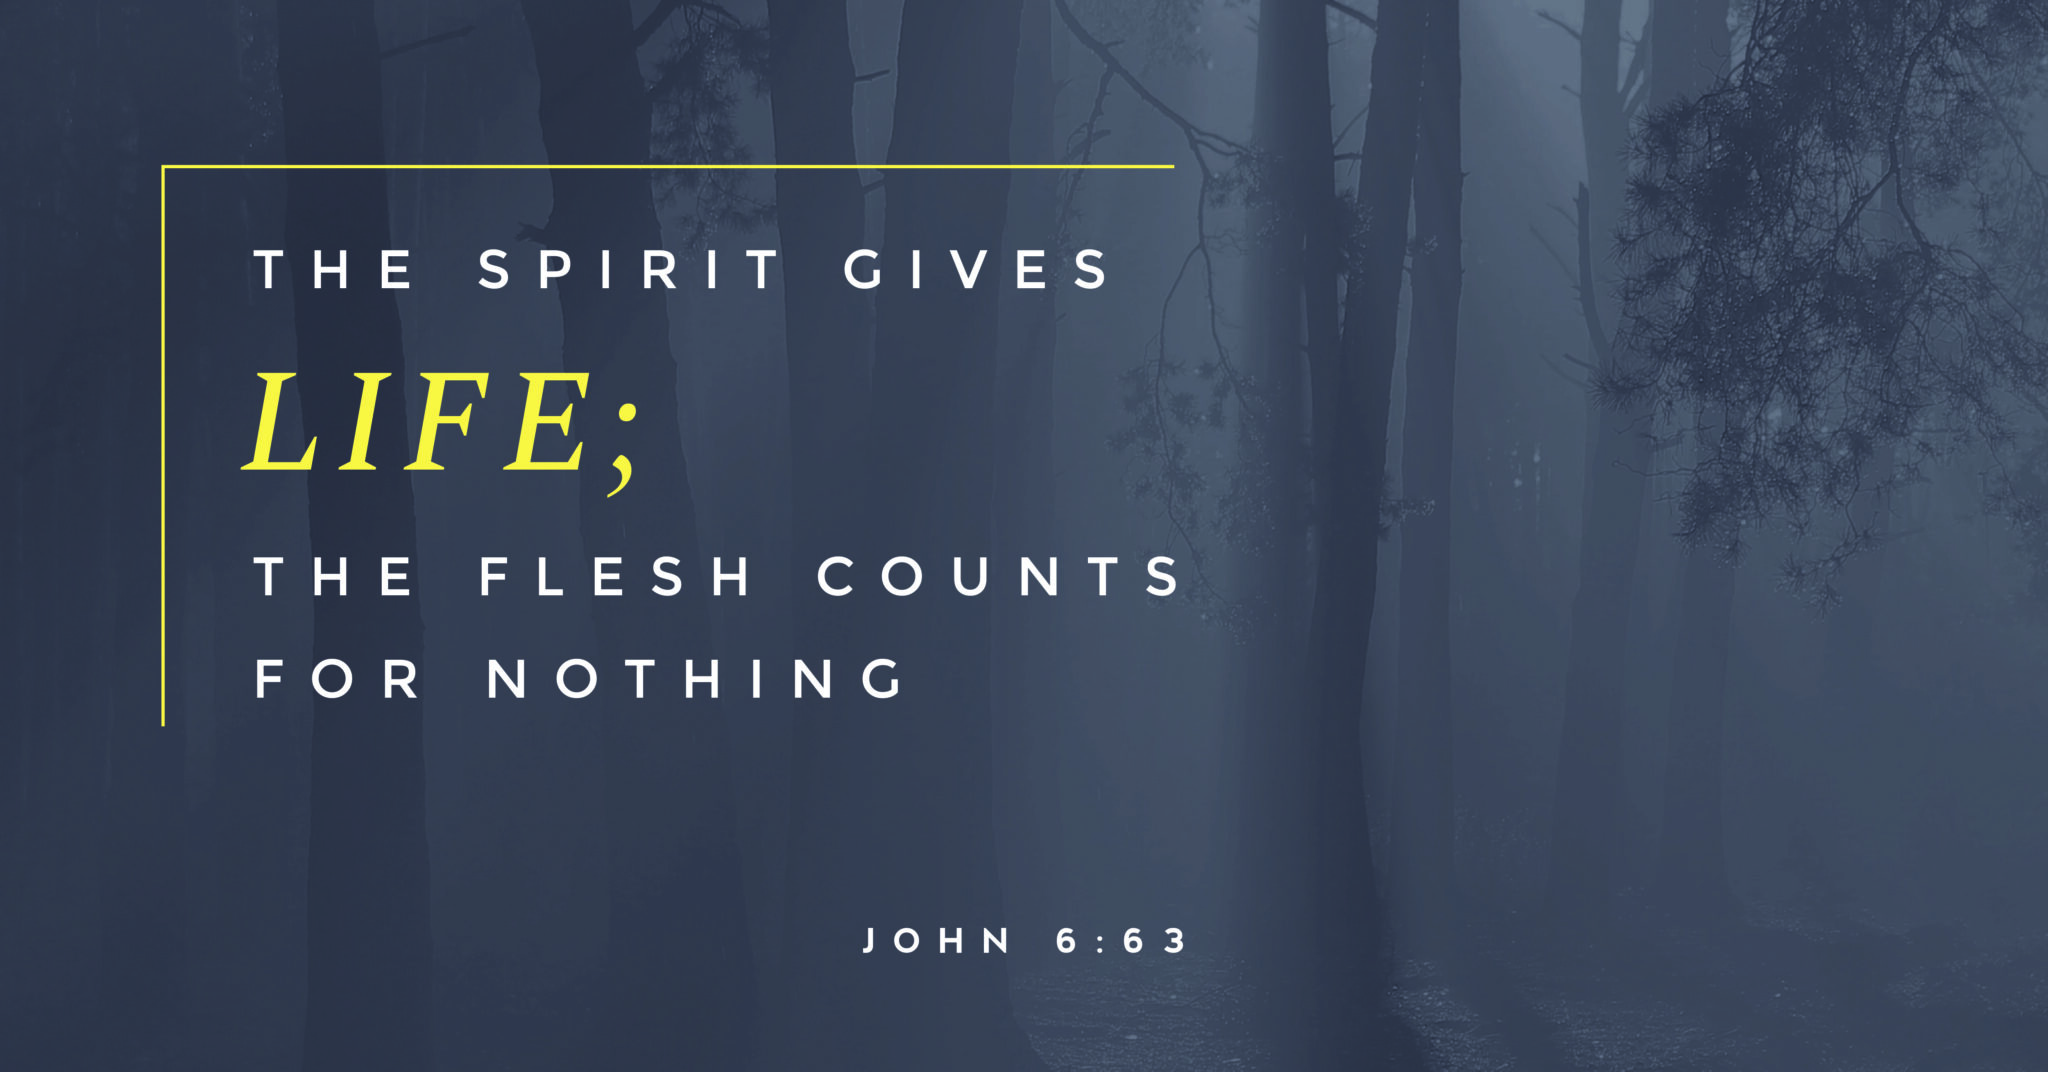 A picture of a forest with the text "The spirit gives life; the flesh counts for nothing. John 6:63"